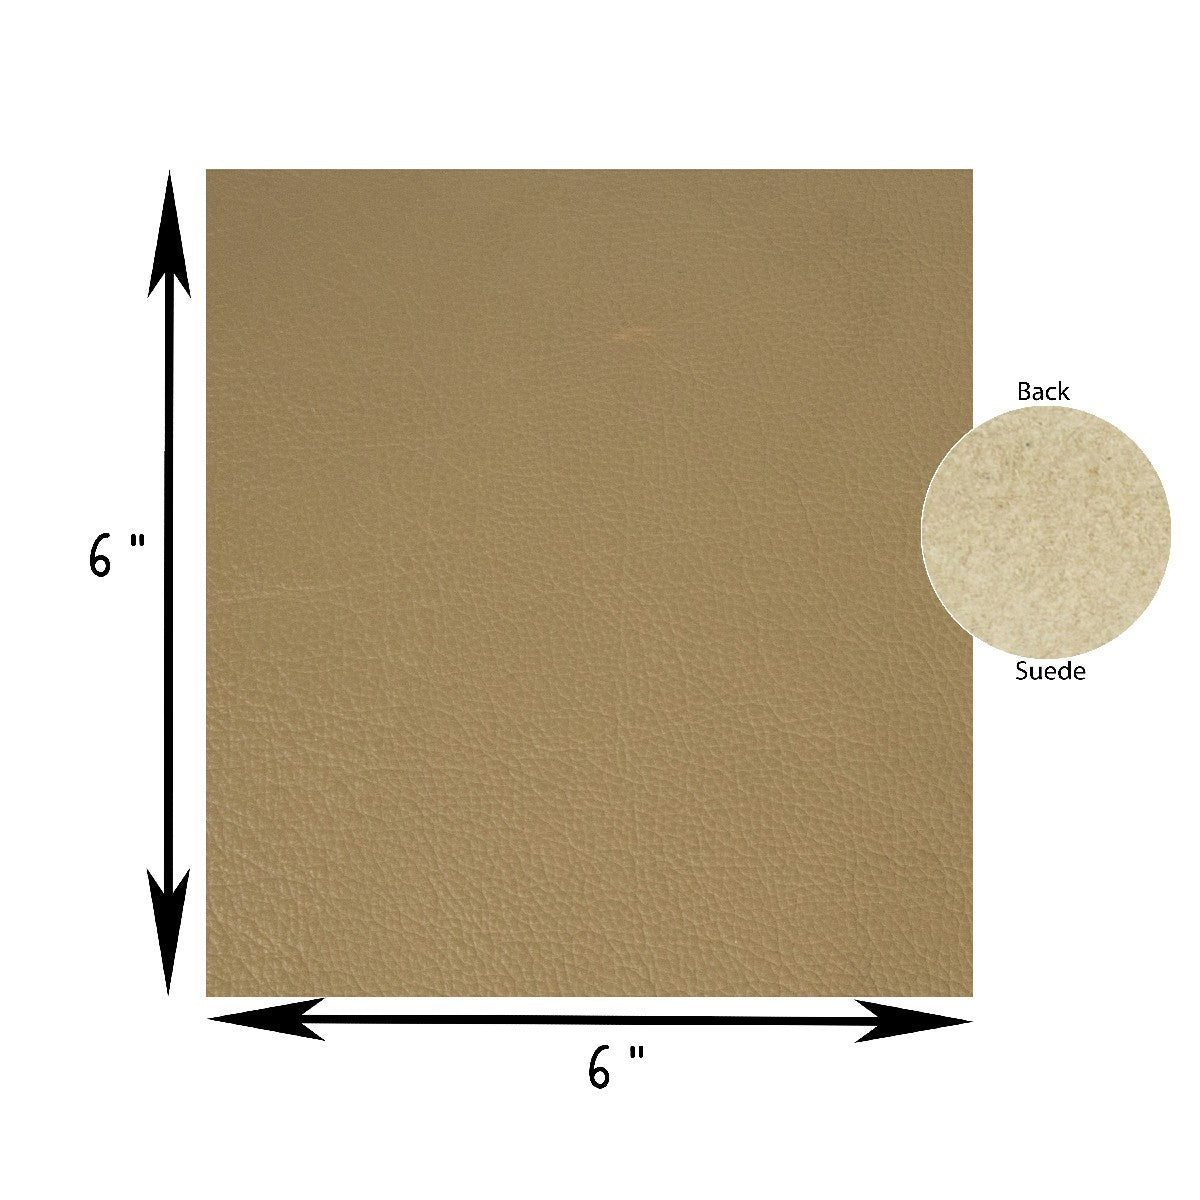 Genuine Leather Tooling and Crafting Sheets | Heavy Duty Full Grain Cowhide (2mm) | Flotter Taupe - FabricLA.com